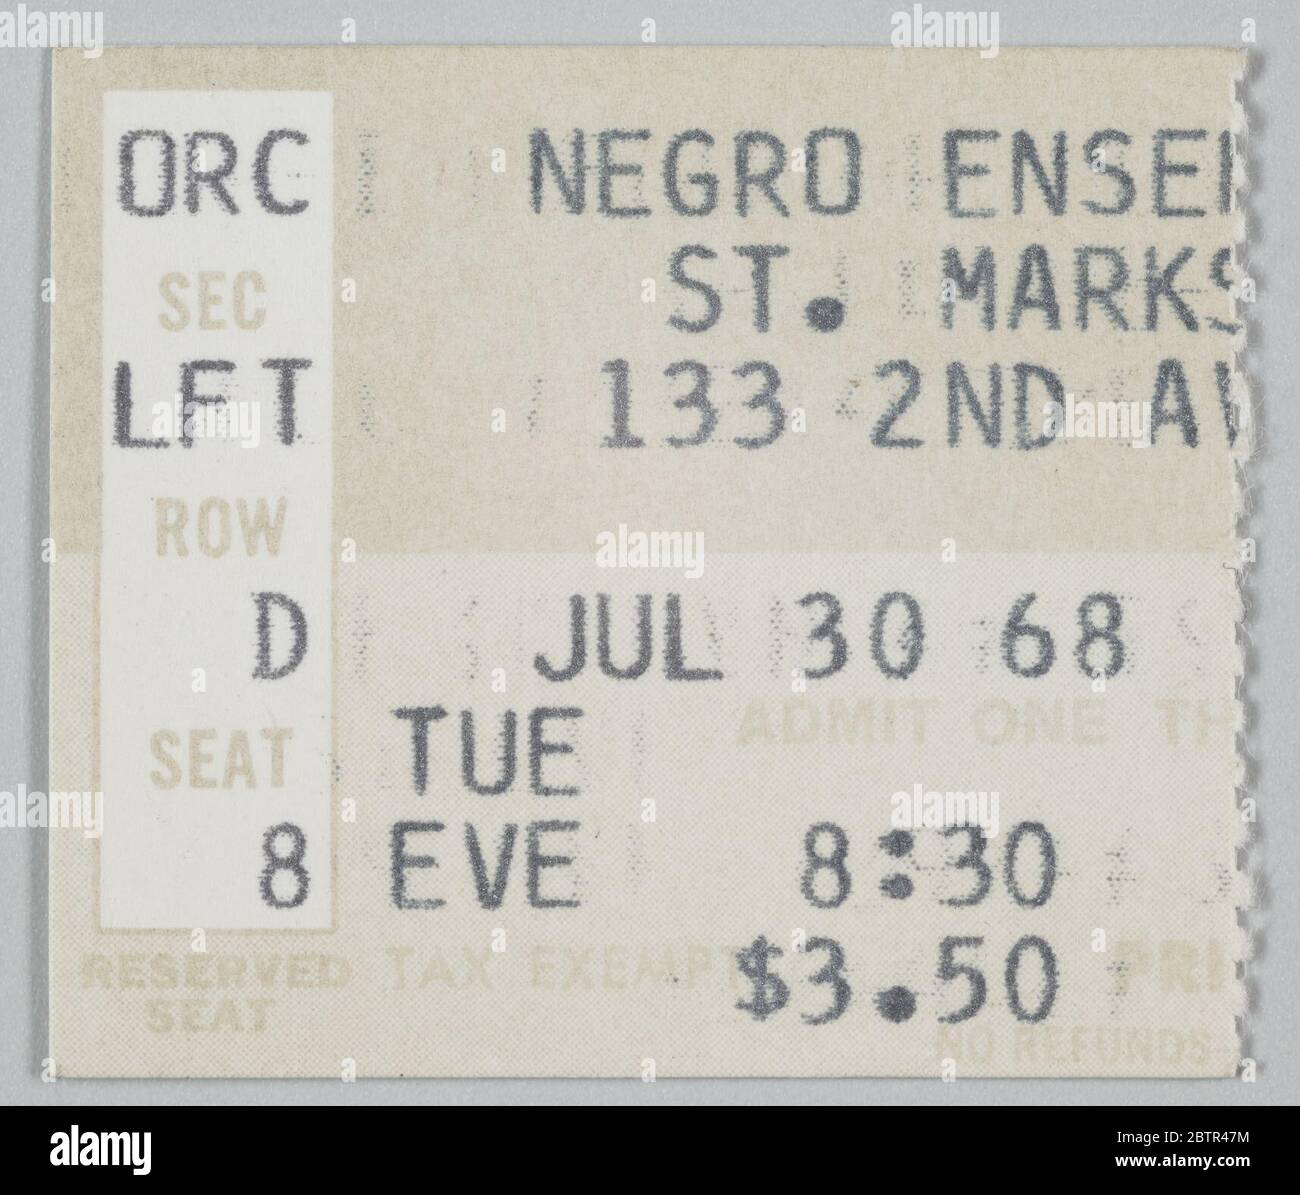 Ticket stub for Song of the Lusitanian Bogey and Daddy Goodness. Ticket stub for Song of the Lusitanian Bogey and Daddy Goodness. Beige paper with black and beige lettering. Stock Photo